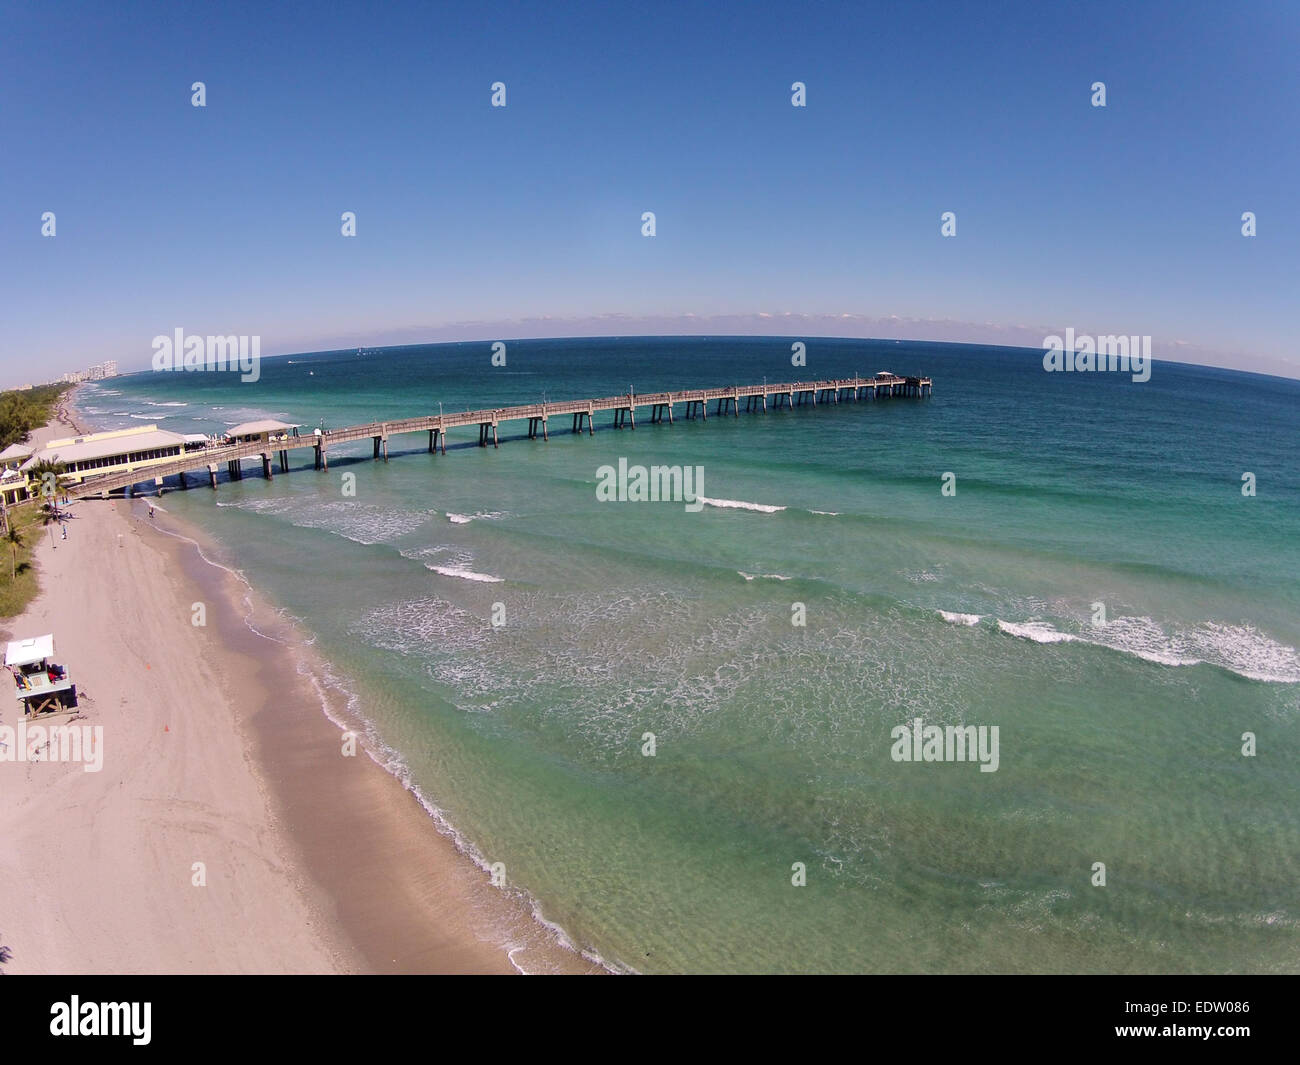 Fishing pier in South Florida seen in aerial view Stock Photo